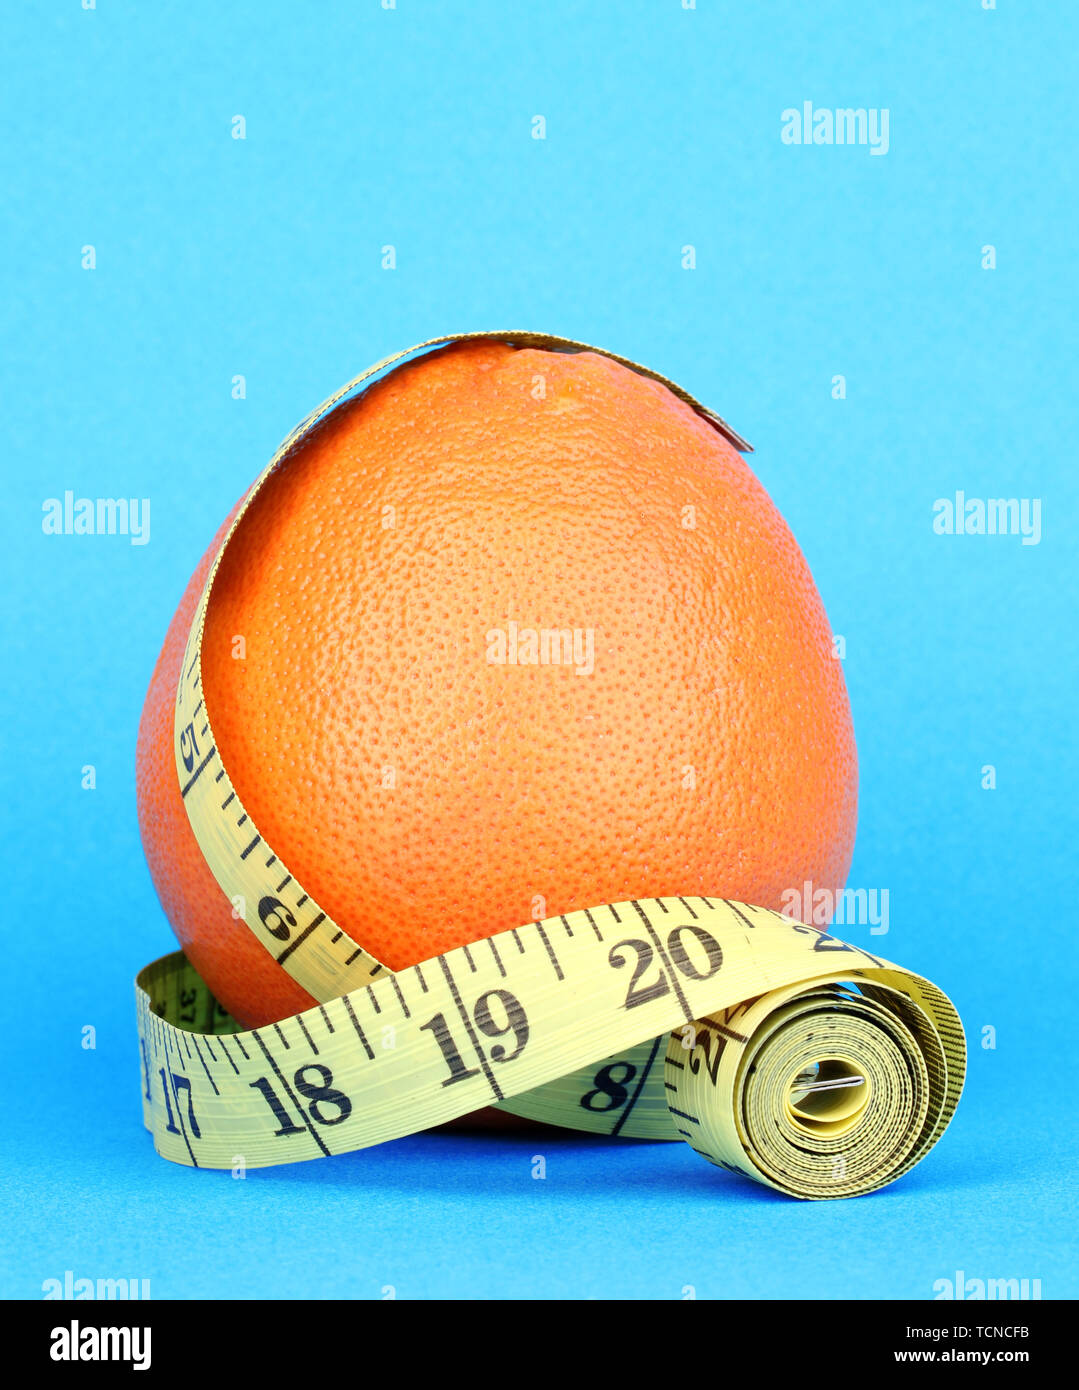 https://c8.alamy.com/comp/TCNCFB/orange-with-measuring-tape-on-blue-background-TCNCFB.jpg